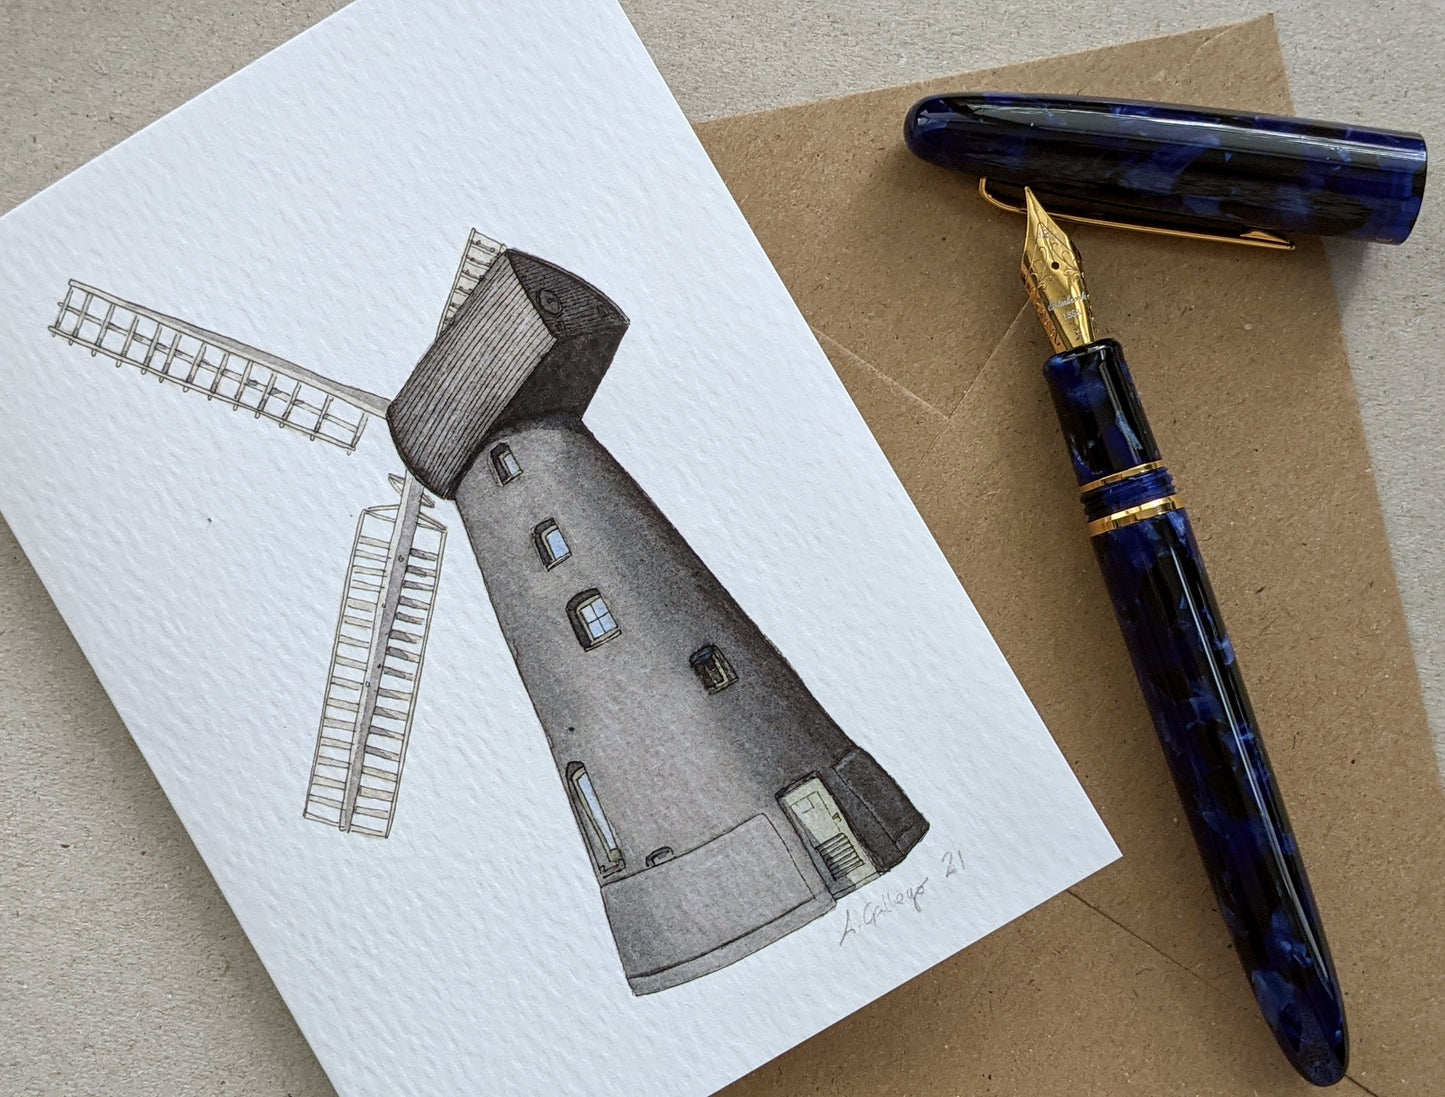 Brixton - Flour Windmill - Greeting card with envelope